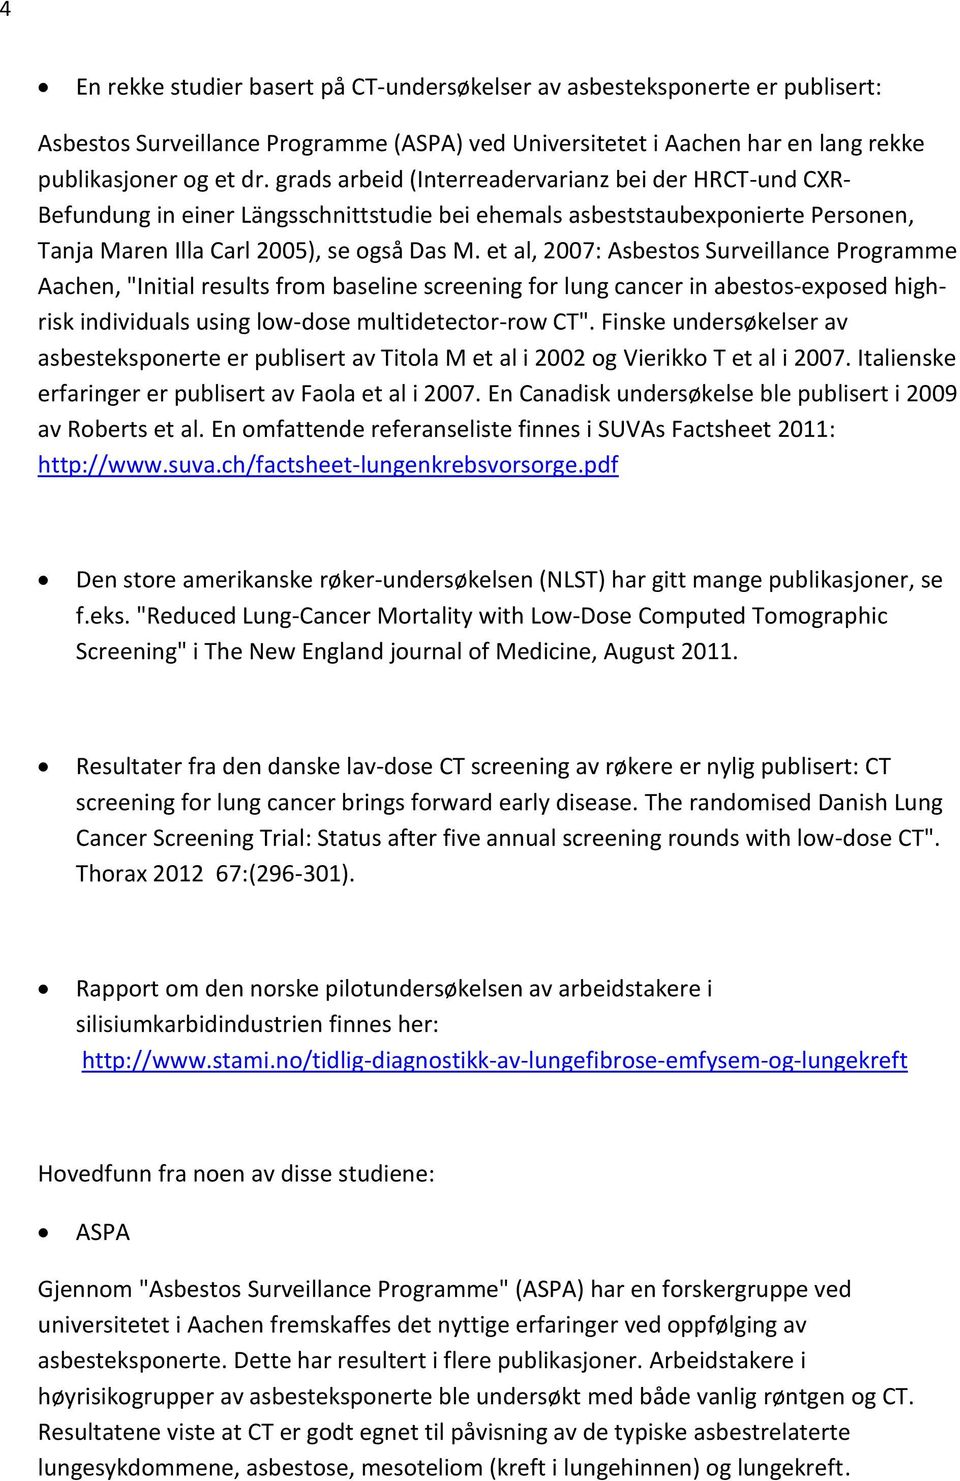 et al, 2007: Asbestos Surveillance Programme Aachen, "Initial results from baseline screening for lung cancer in abestos-exposed highrisk individuals using low-dose multidetector-row CT".